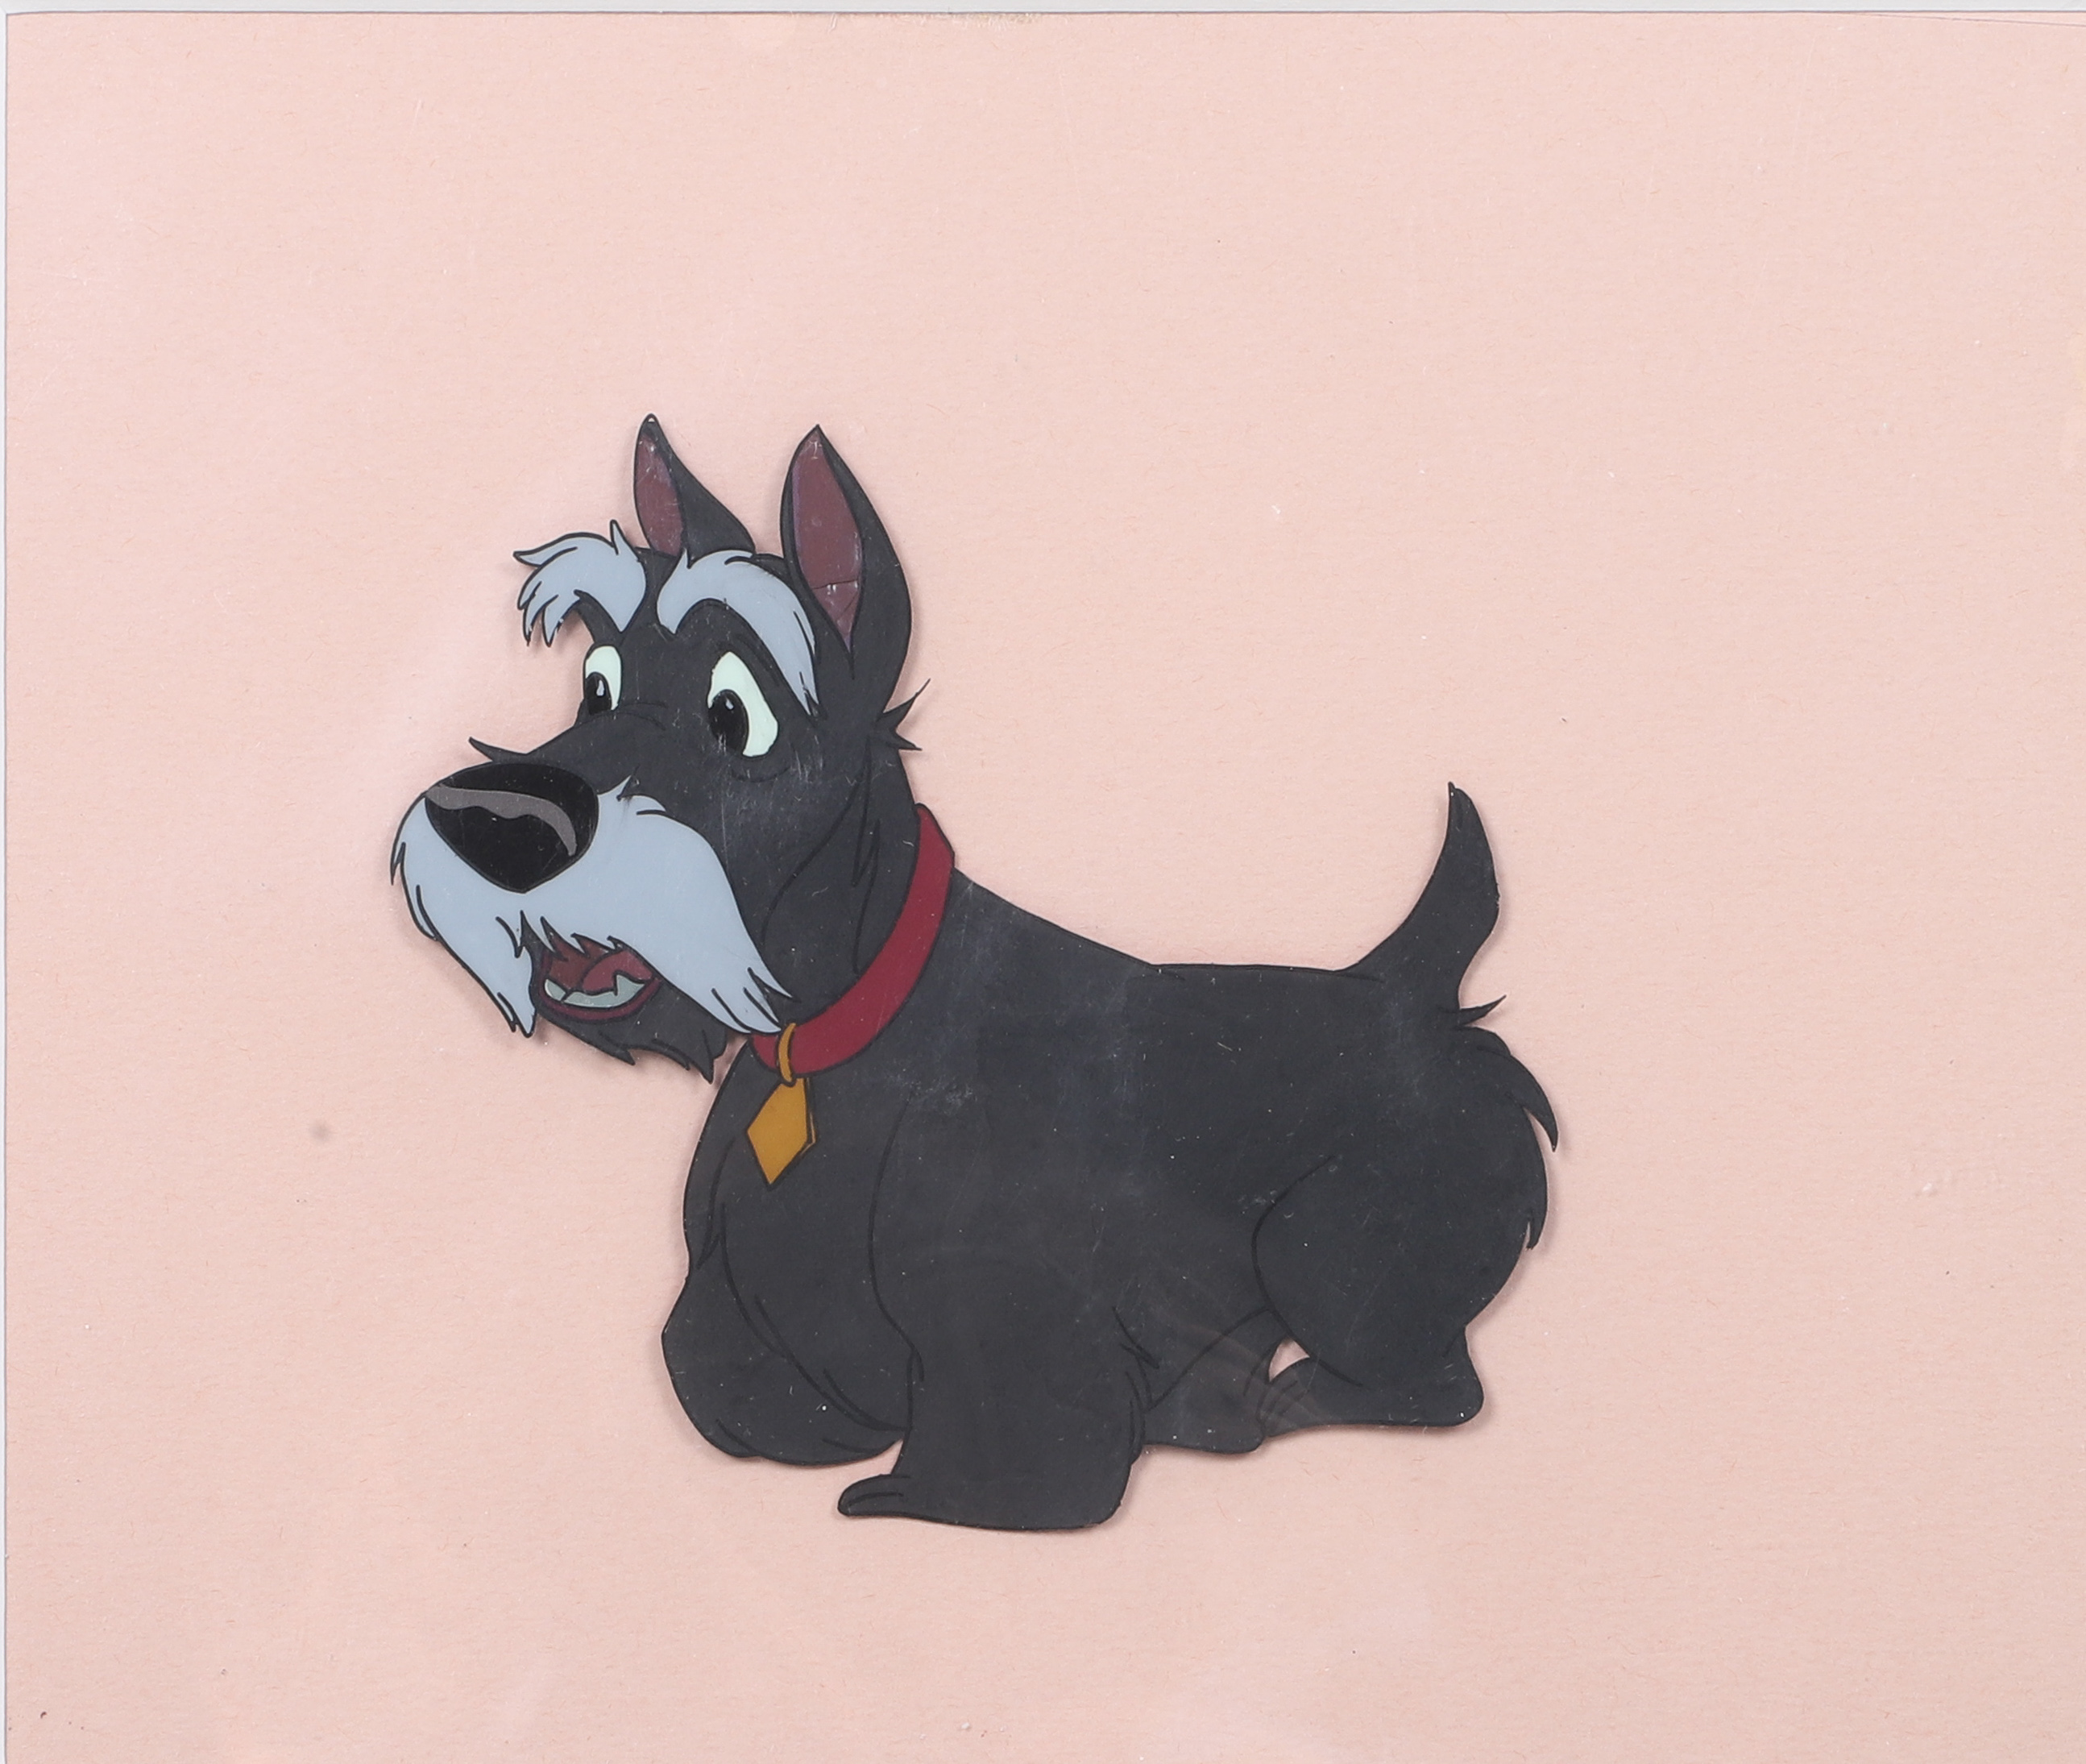 Lady and the Tramp production cel 2e1cb3